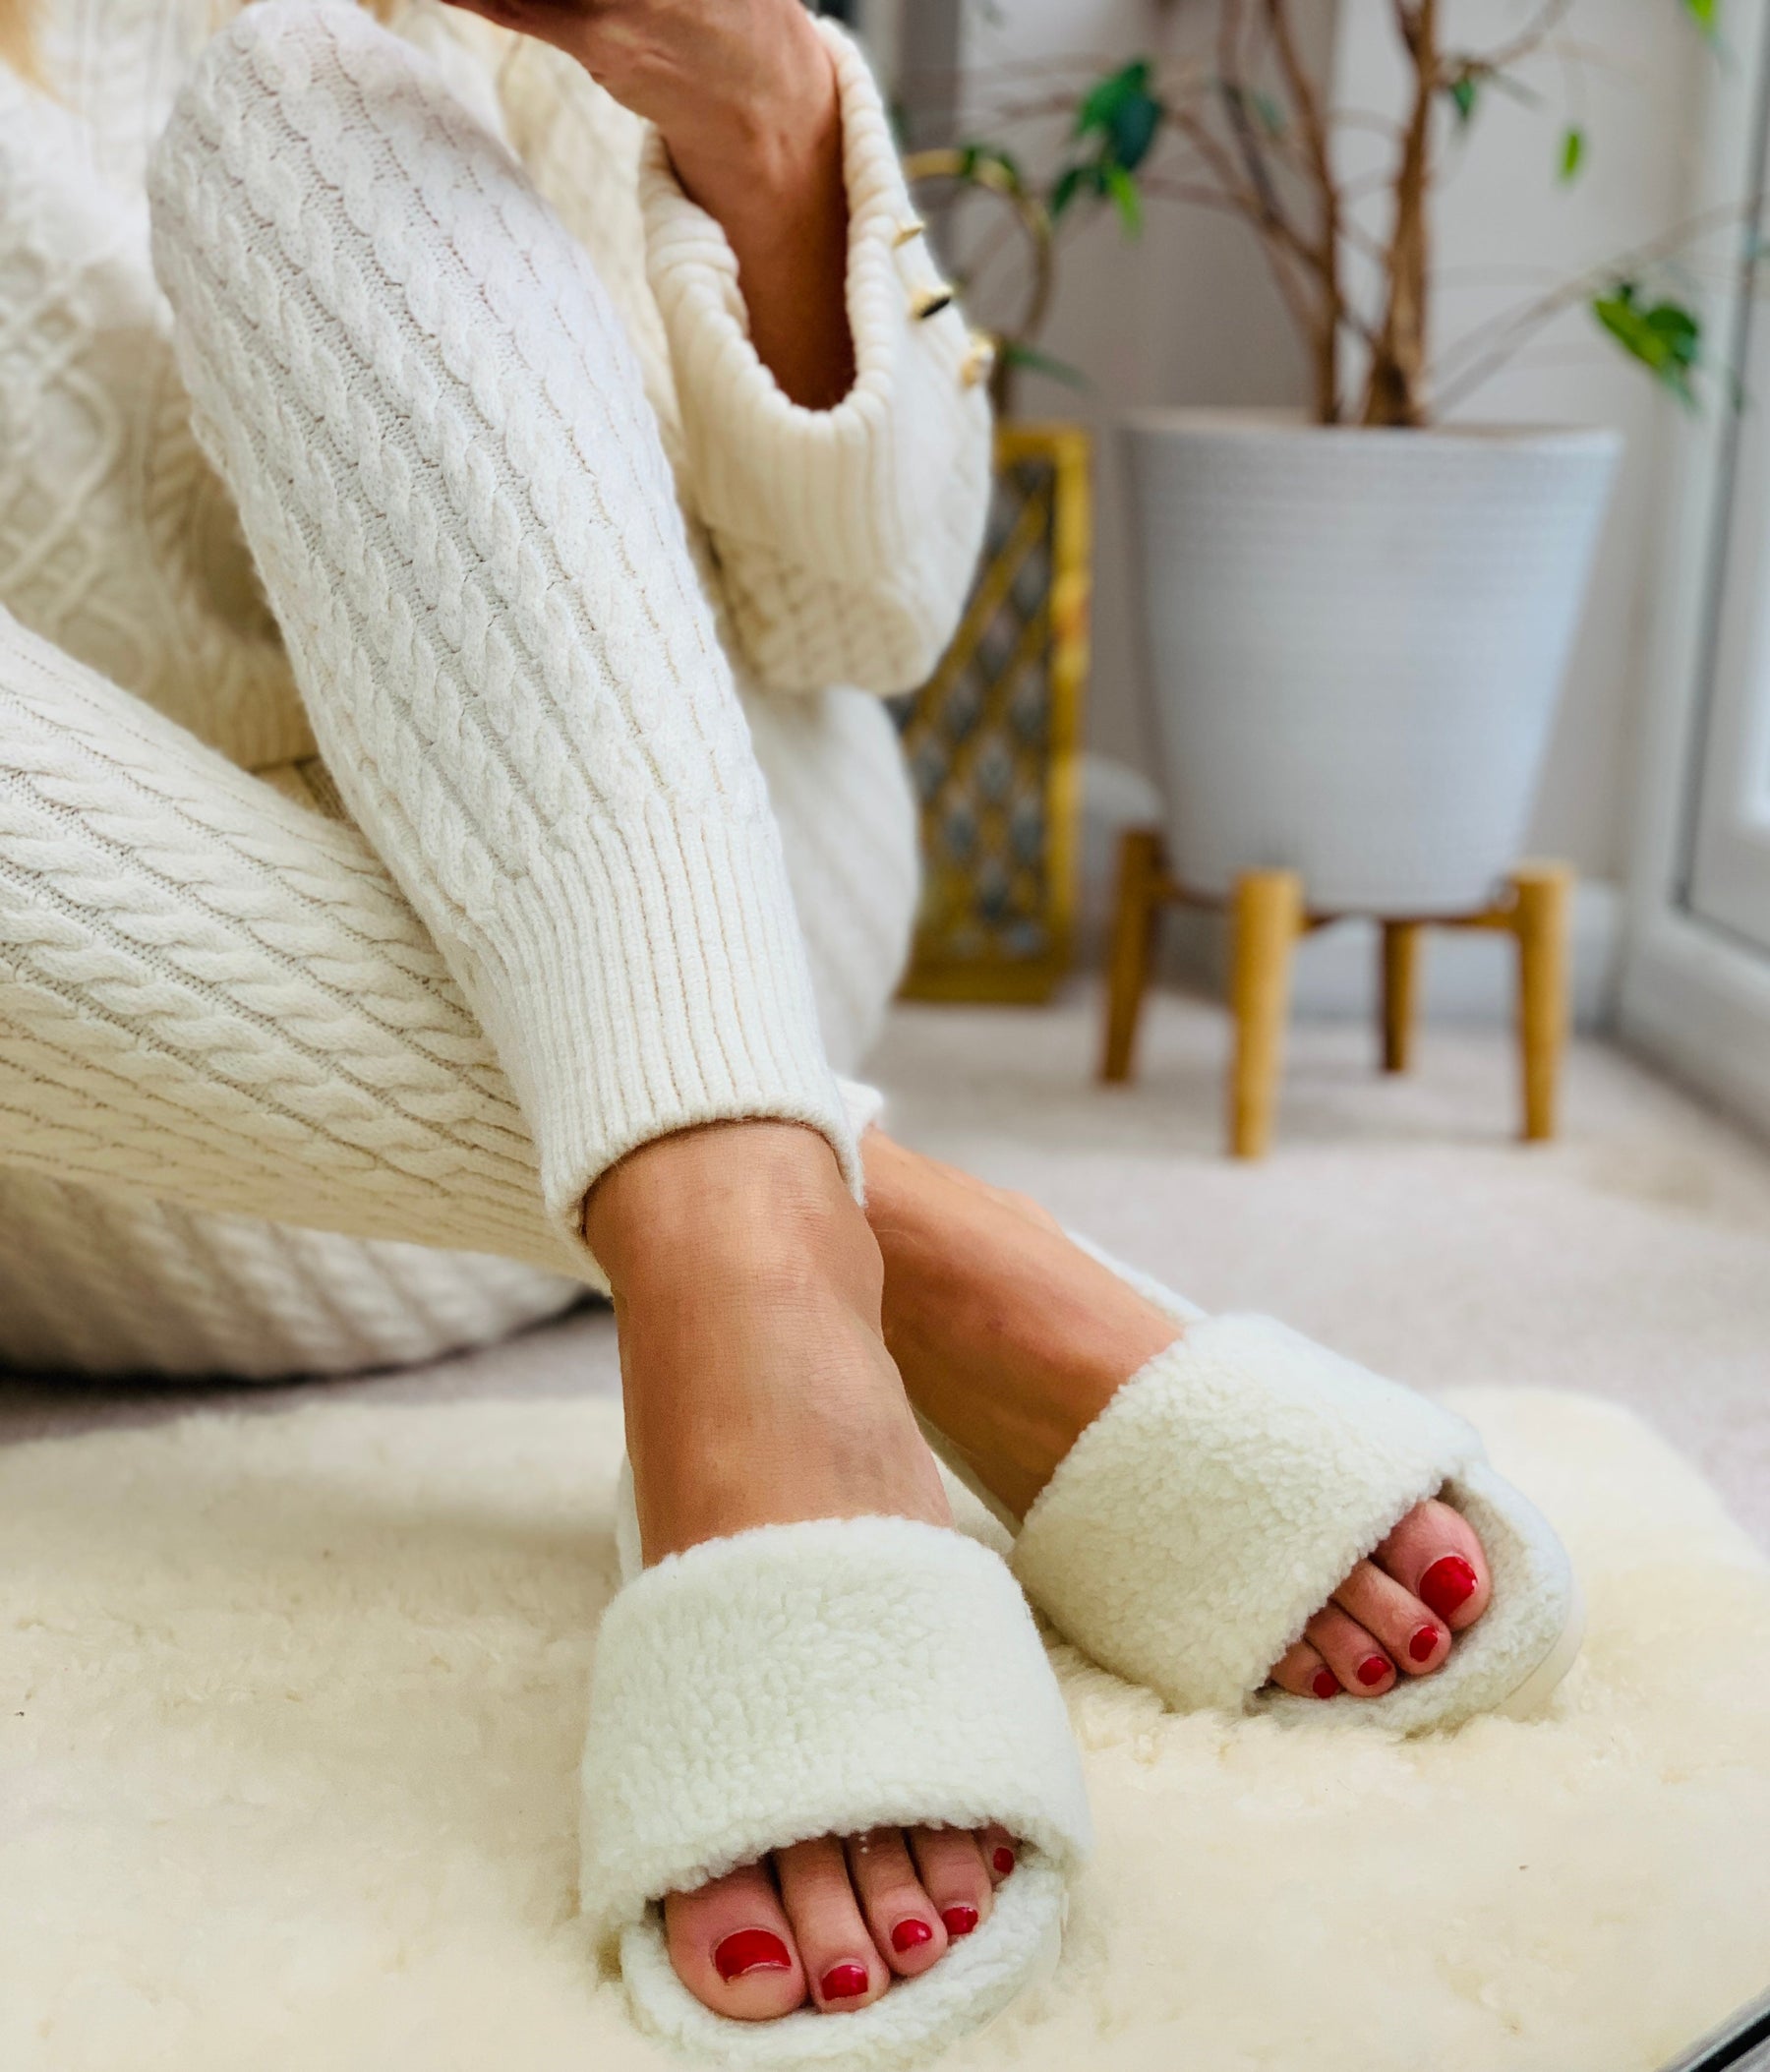 cream wool slipper slide with arch support